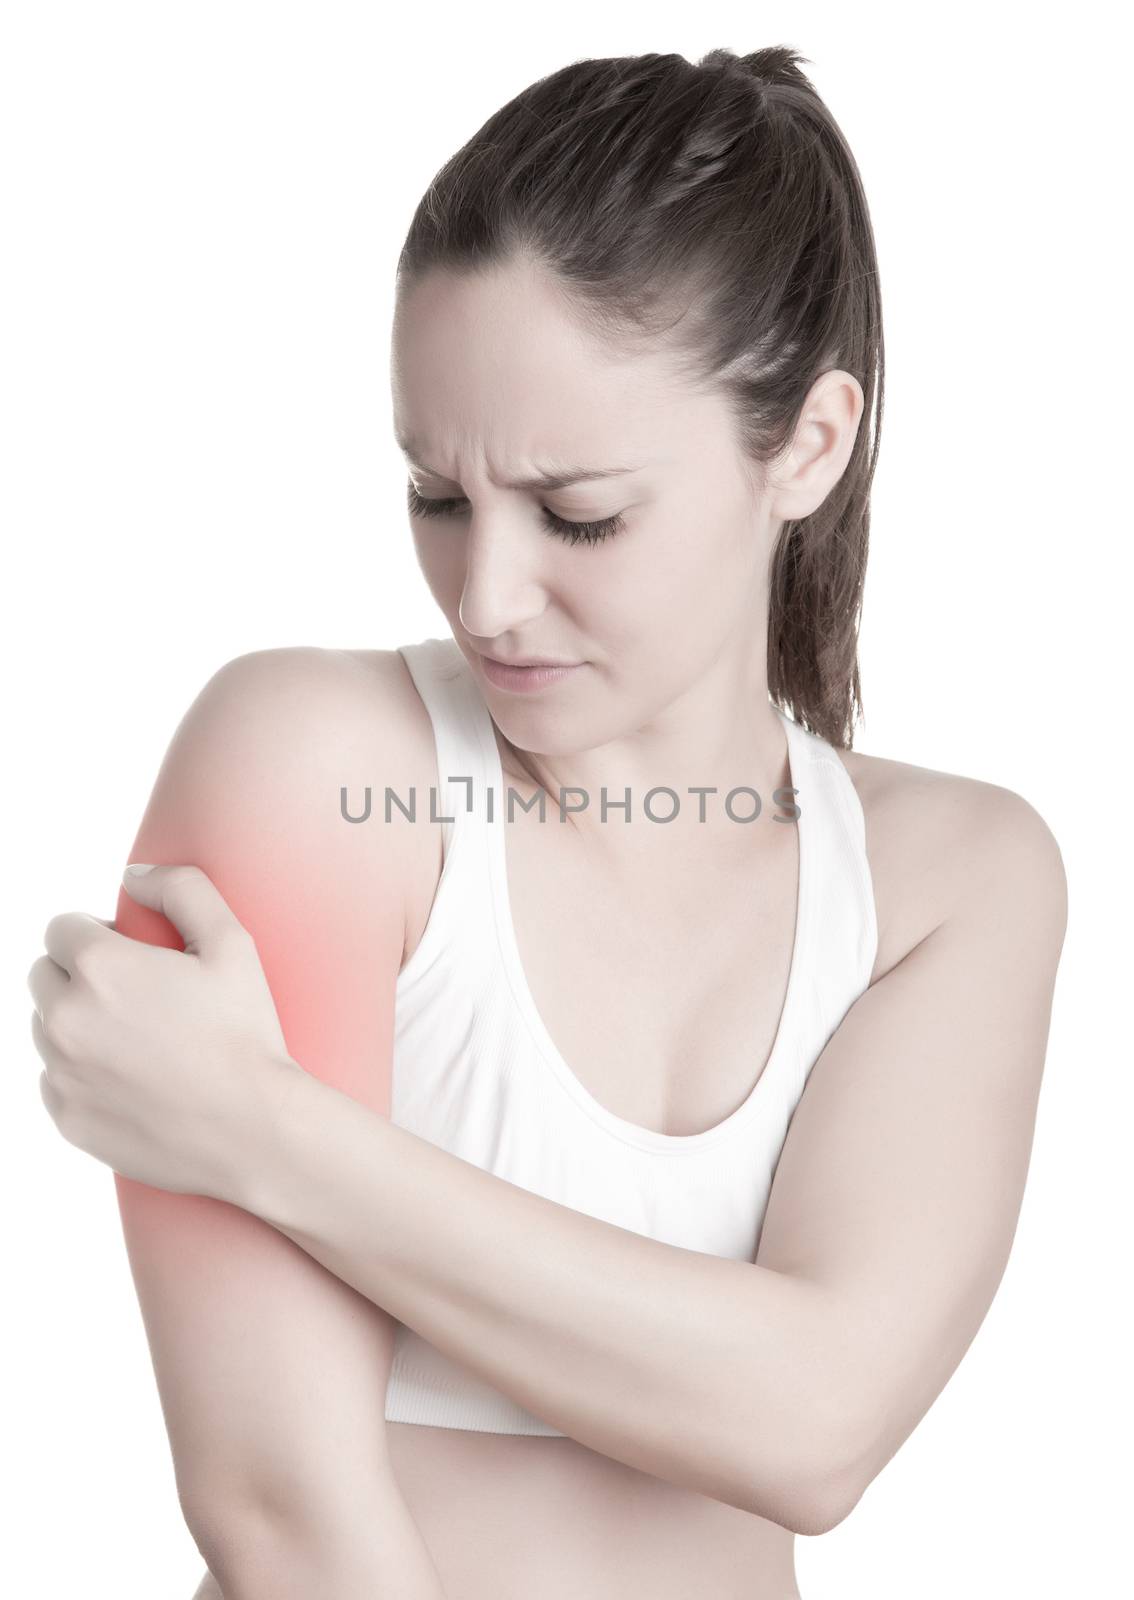 Female with pain in her arm, isolated in a white background